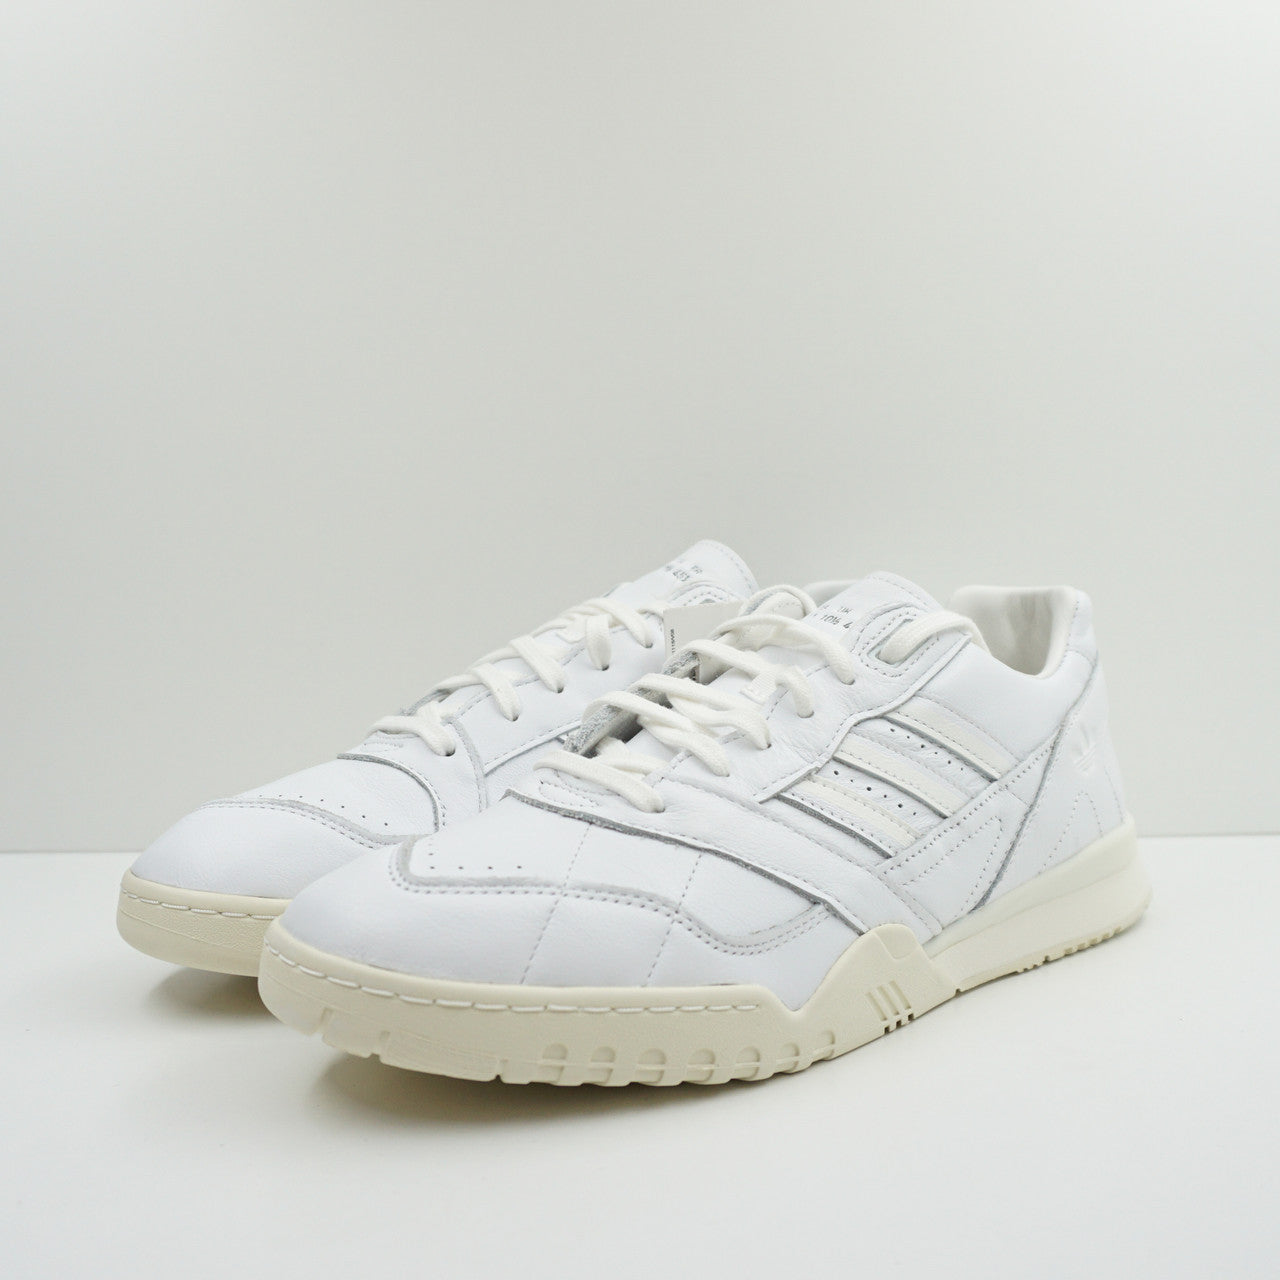 Adidas AR Trainer Recon Pack